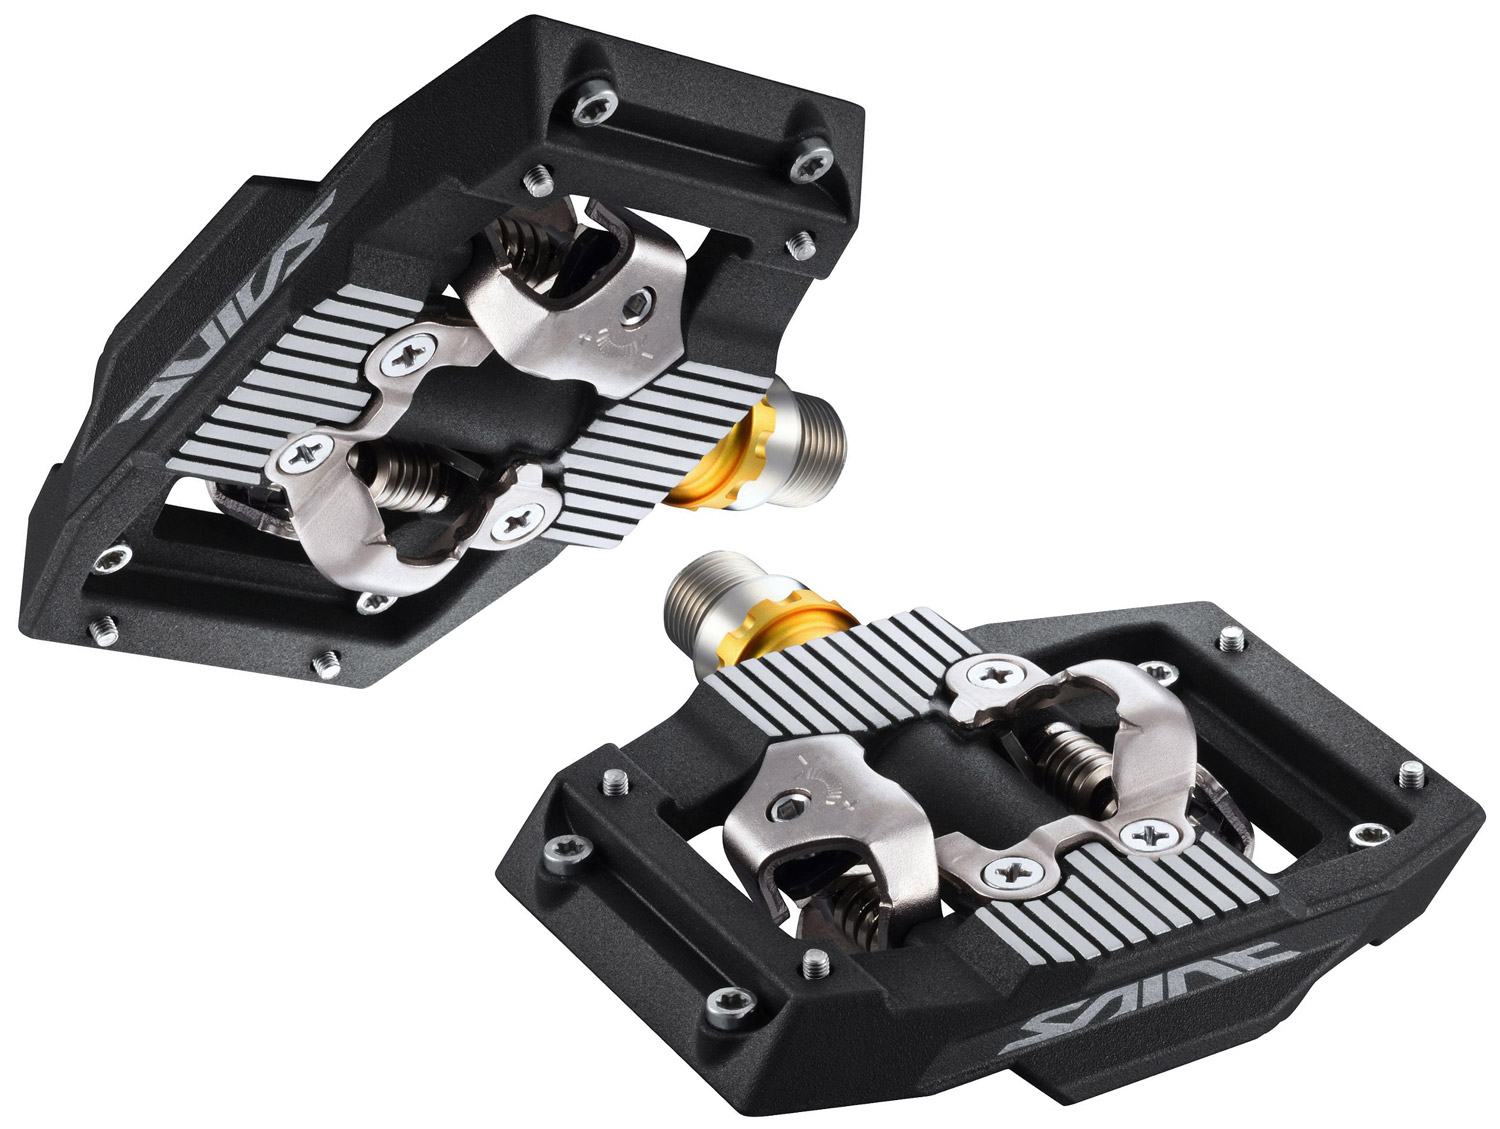 Shimano 11 and 12 Speed Components Back in Stock